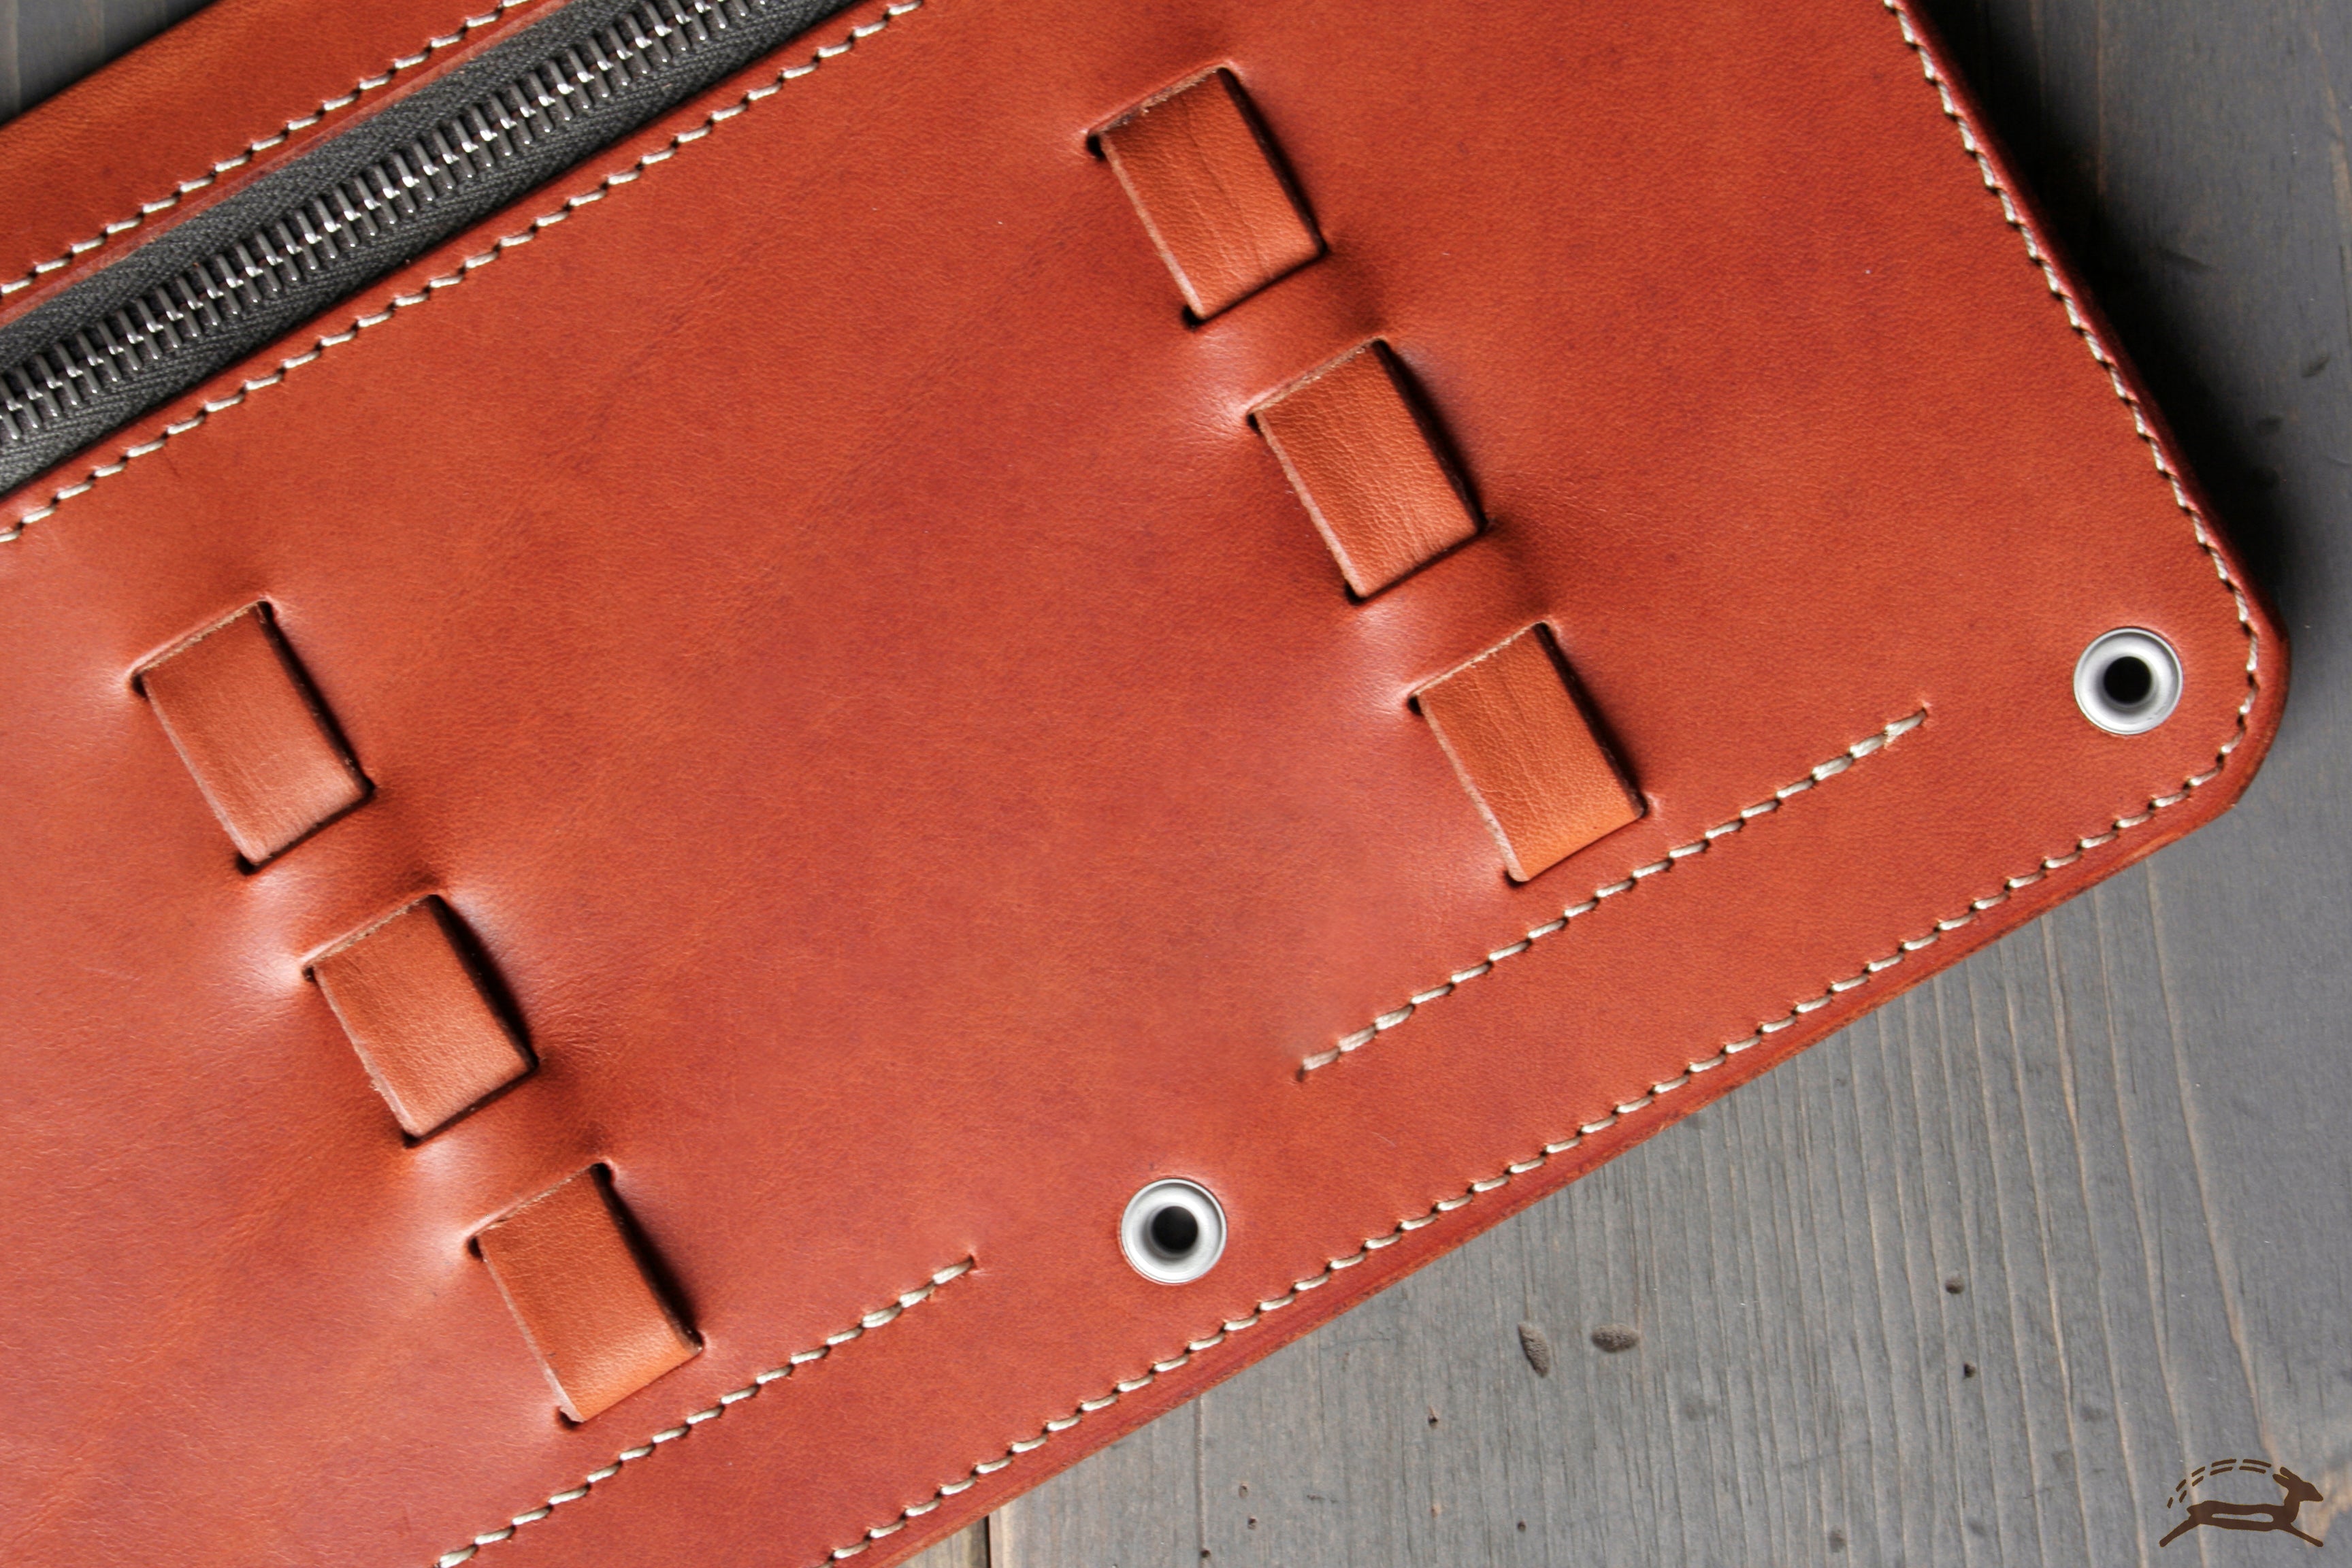 Leather Pencil Case - OCHRE handcrafted